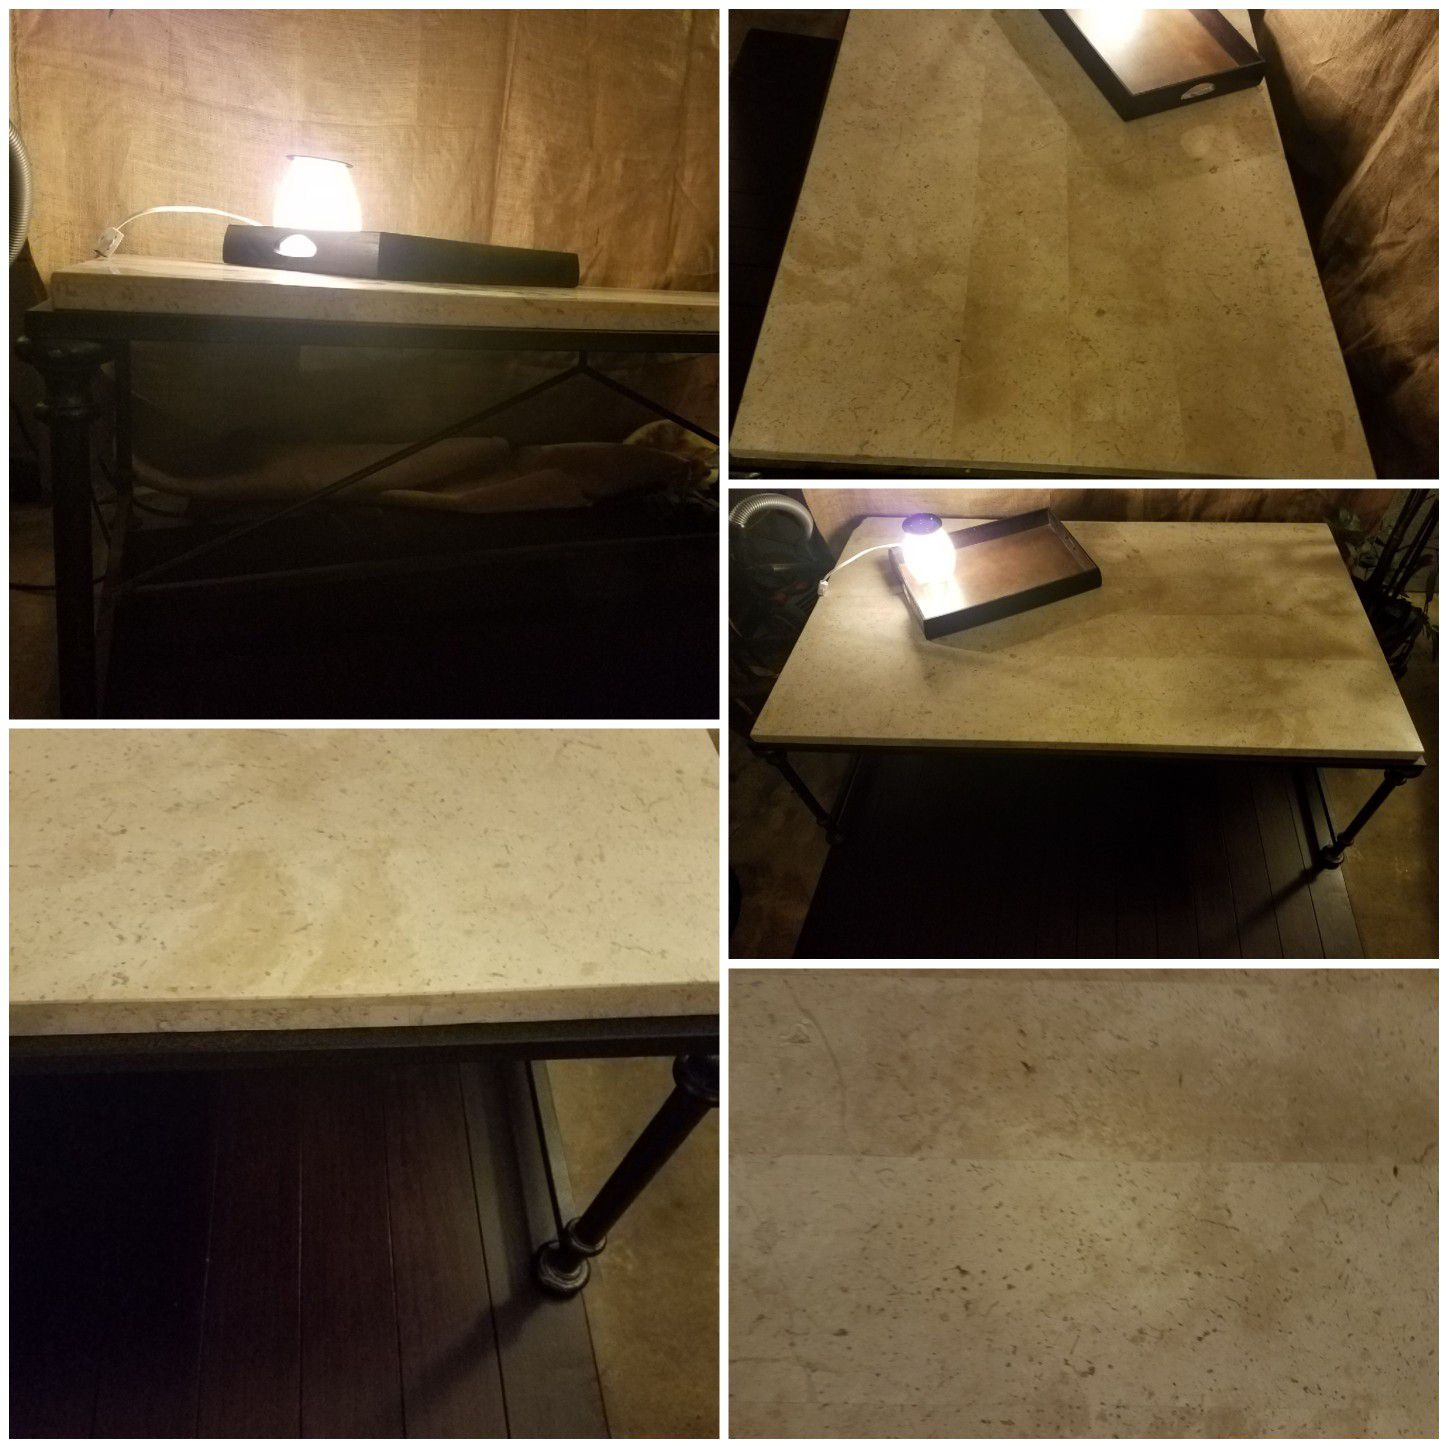 Table, higher end w/corner flaw that can be concealed fairly easy